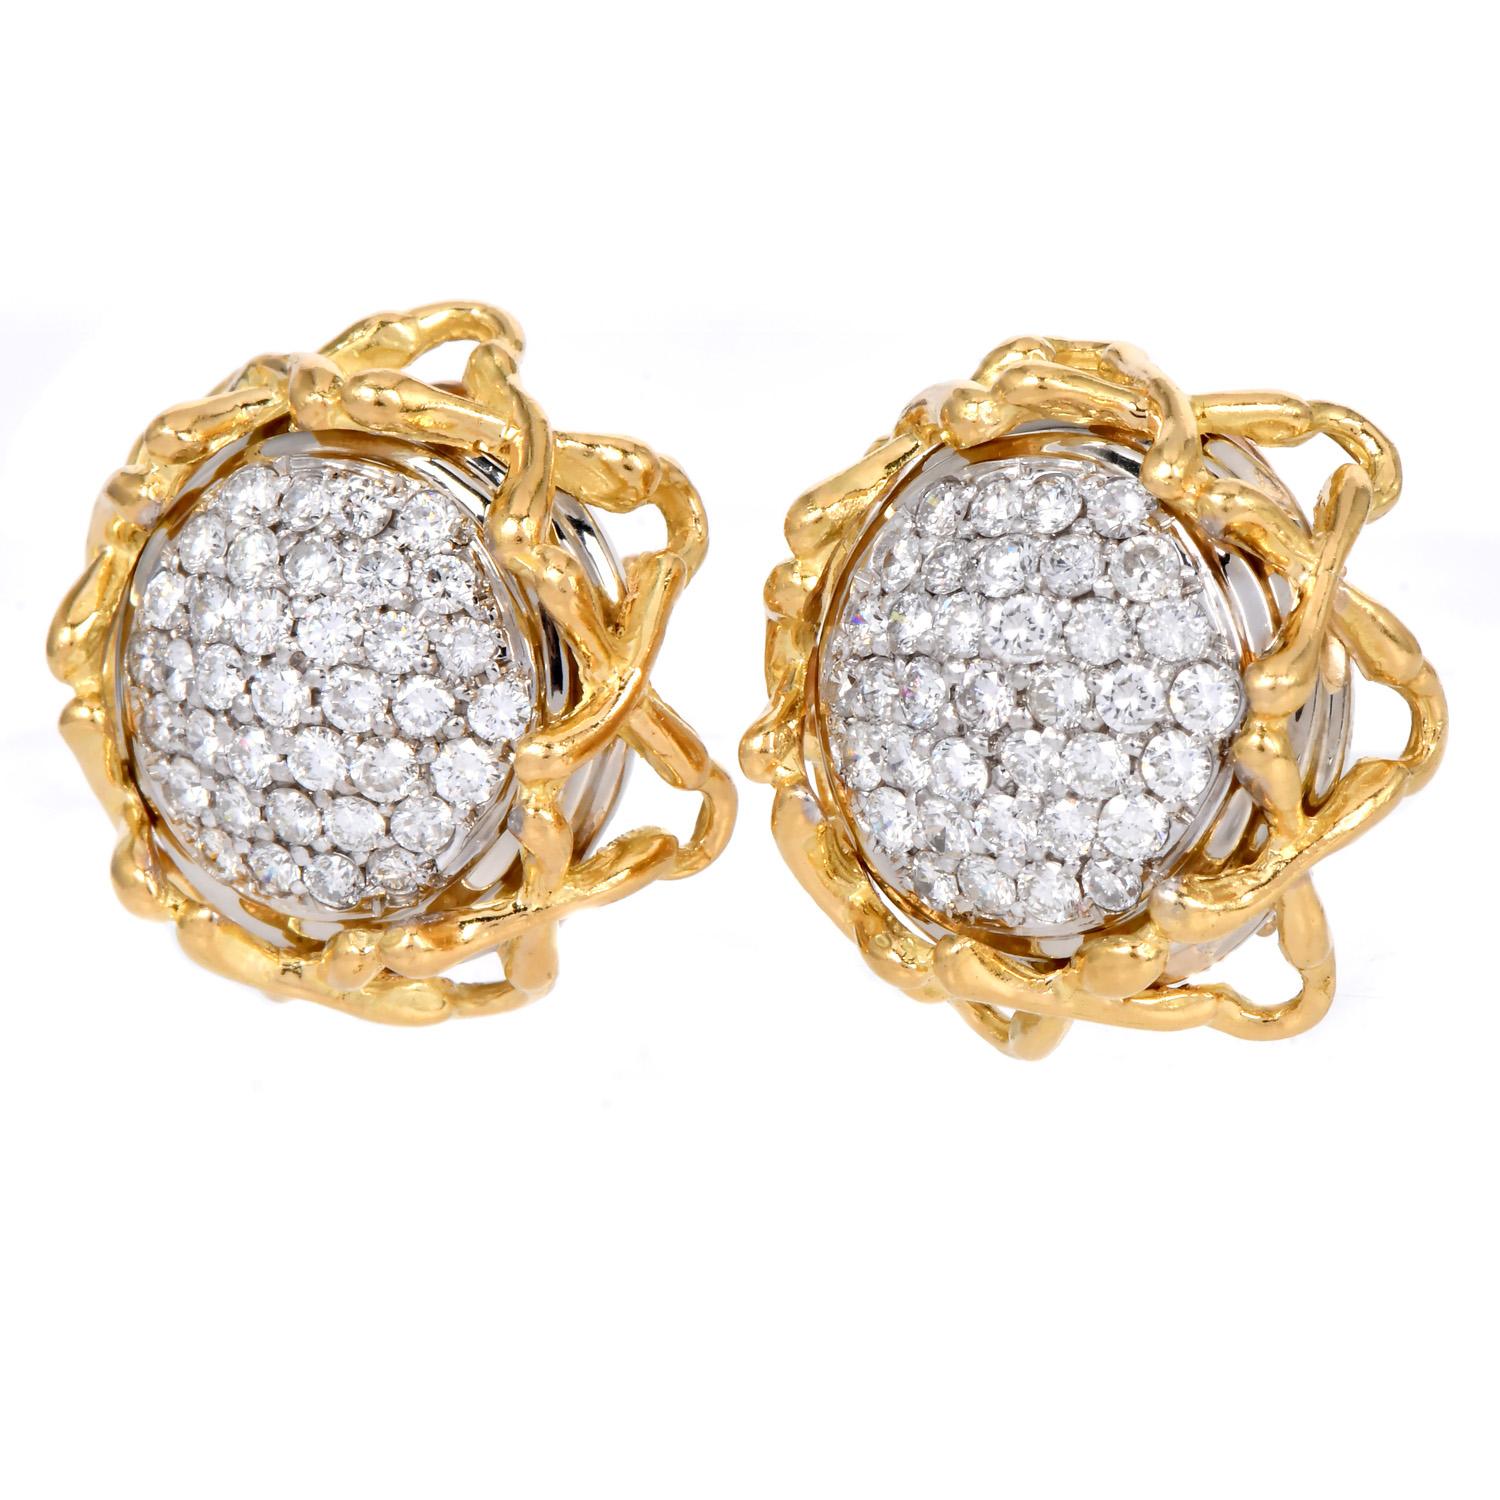 Exquisite vintage circa 1970S earrings, featuring natural round diamonds set in a luxurious combination of 18K yellow and white gold.

These earrings are masterfully crafted to resemble sunflowers, with a bamboo-style framework encircling the